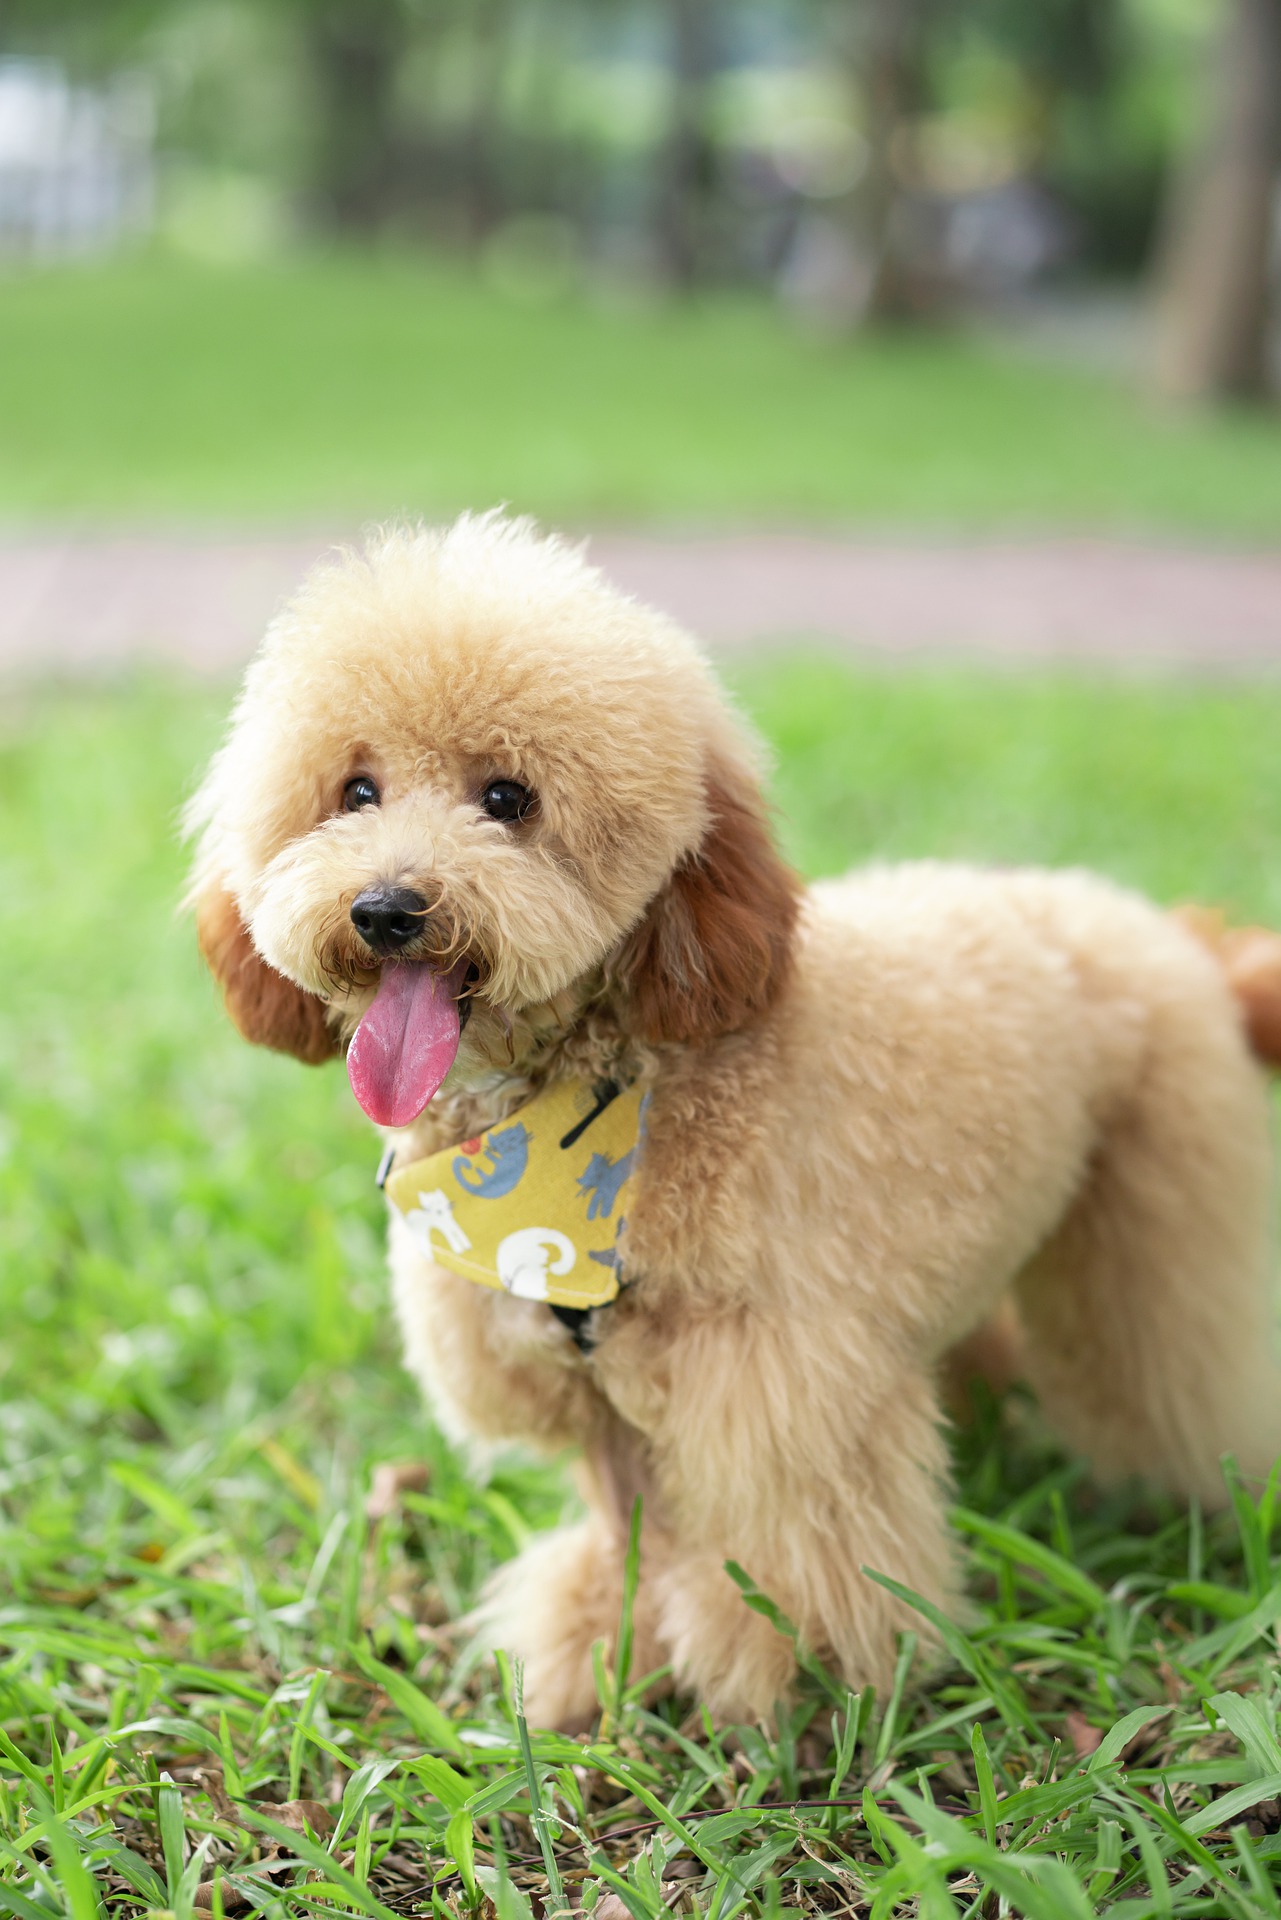 dogs similar to toy poodles.